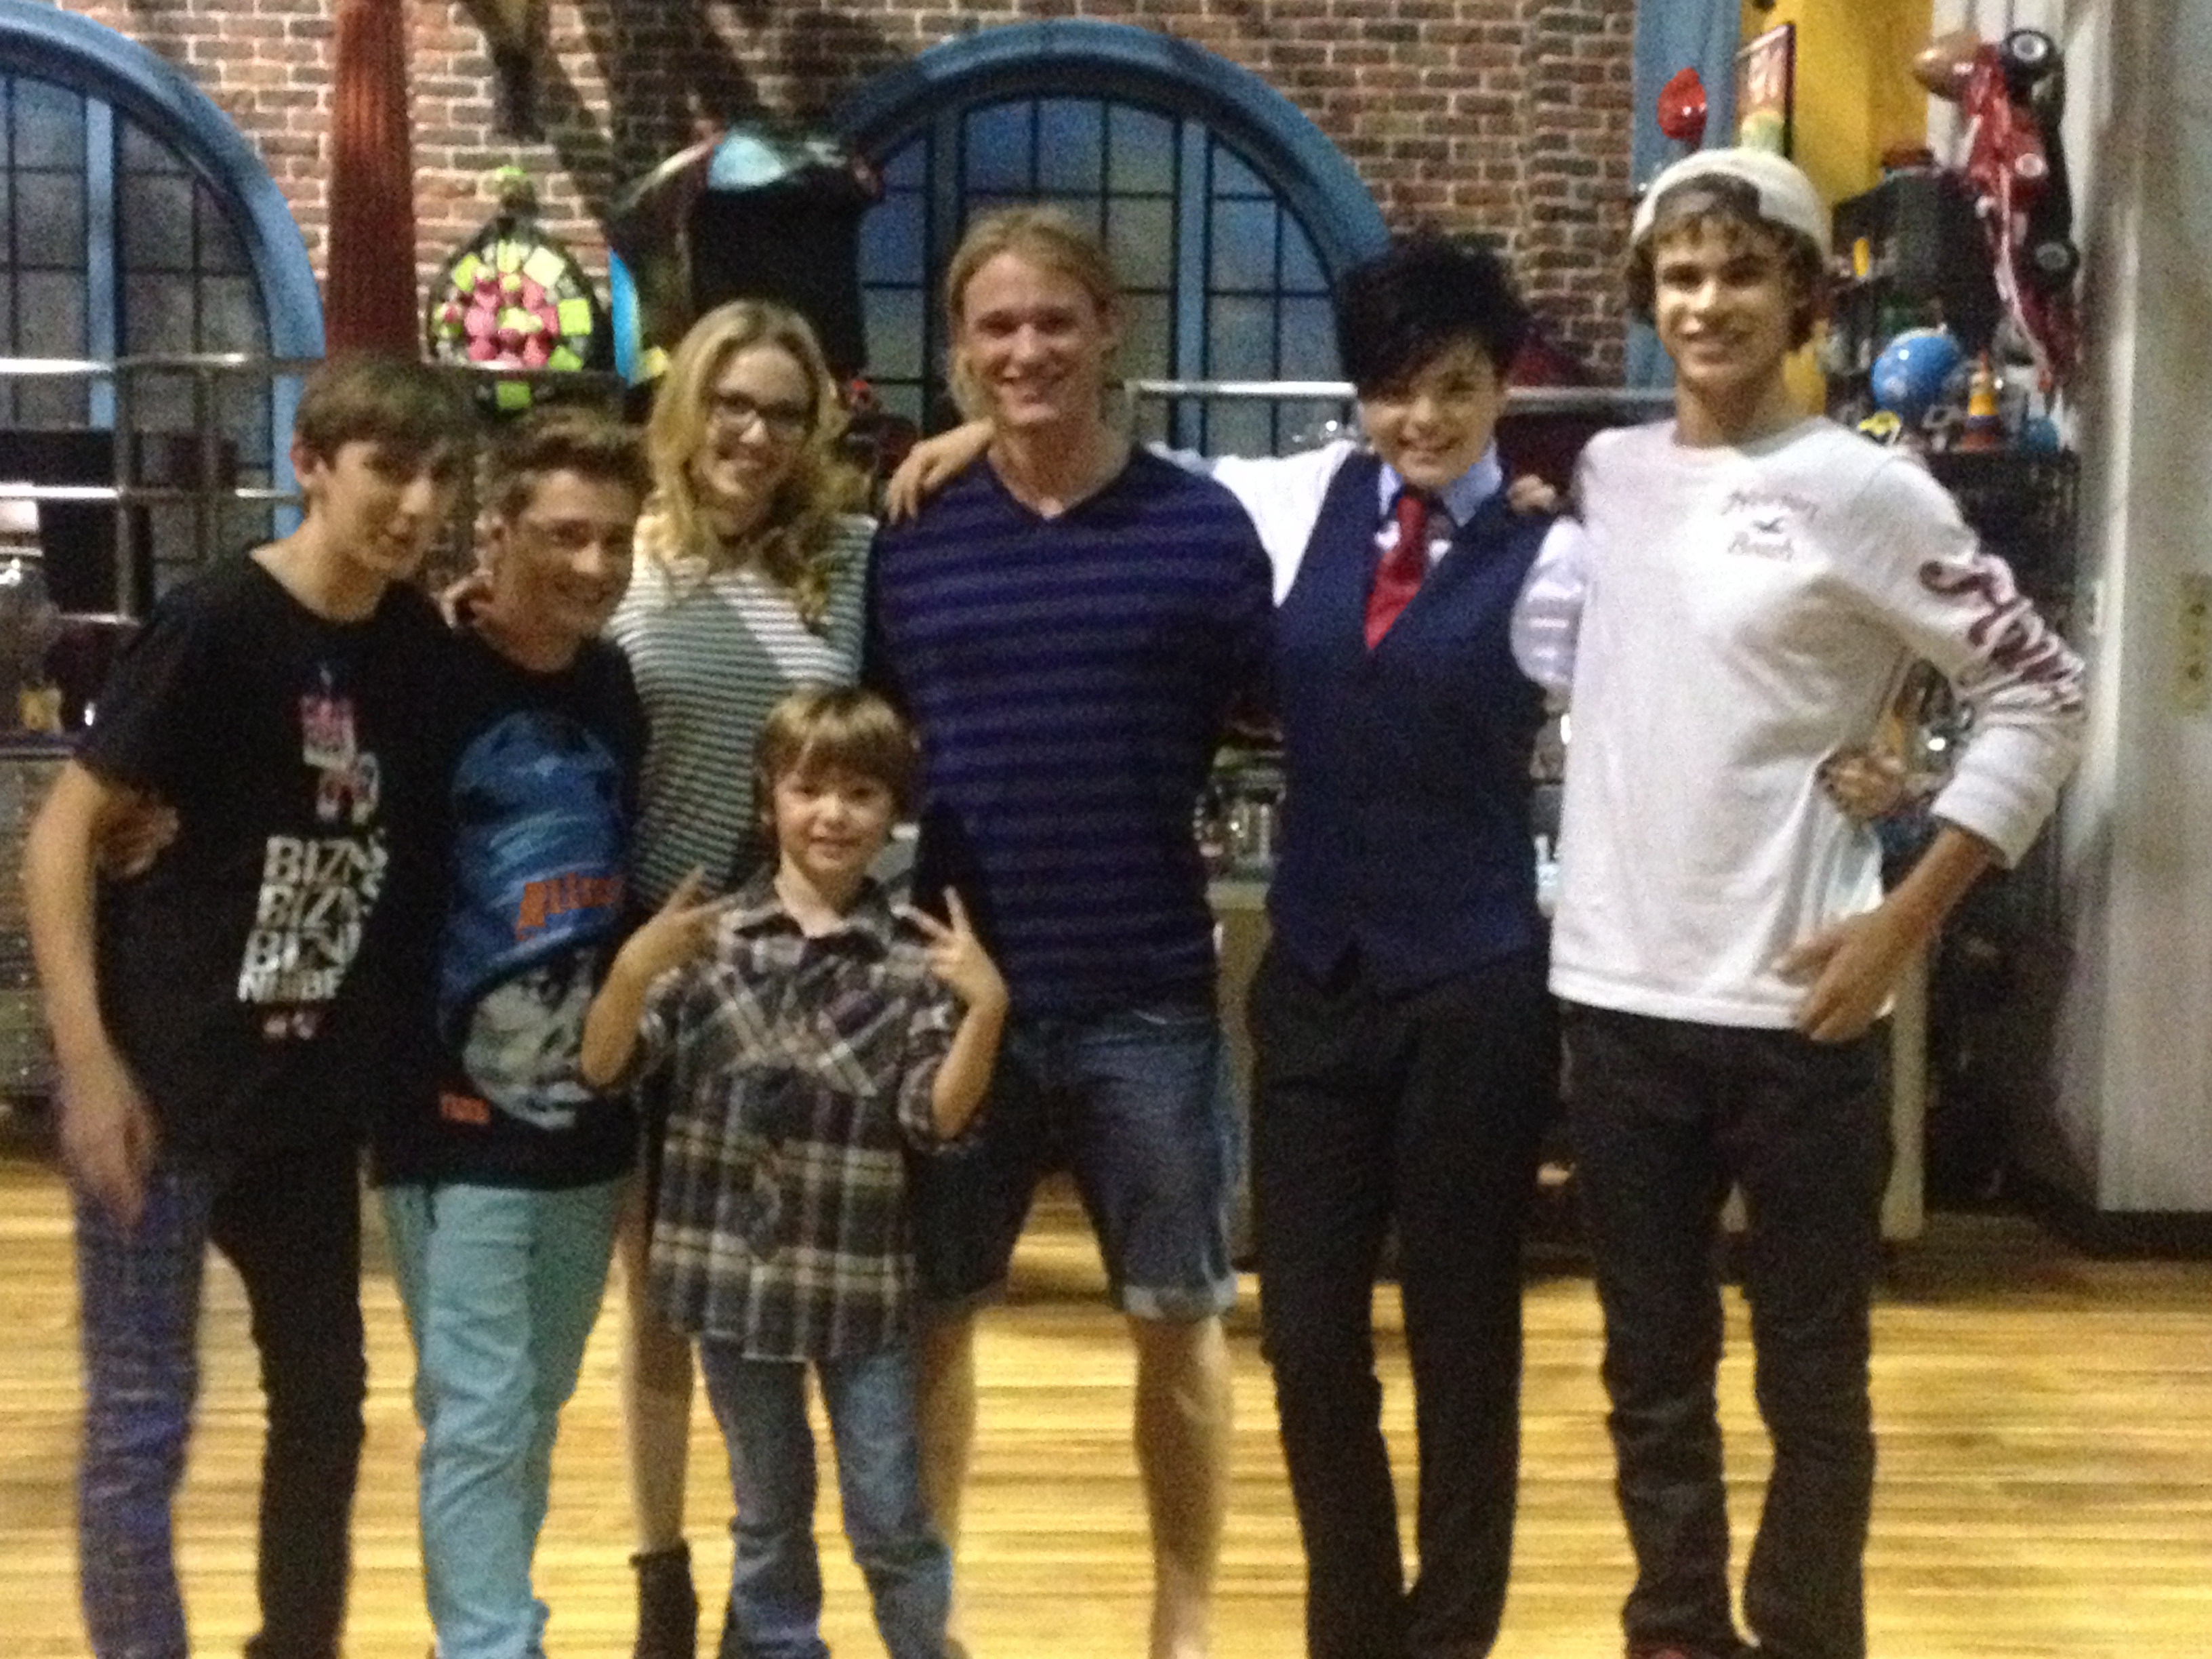 Christian on set as a guest star role with cast of Some Assembly Required.